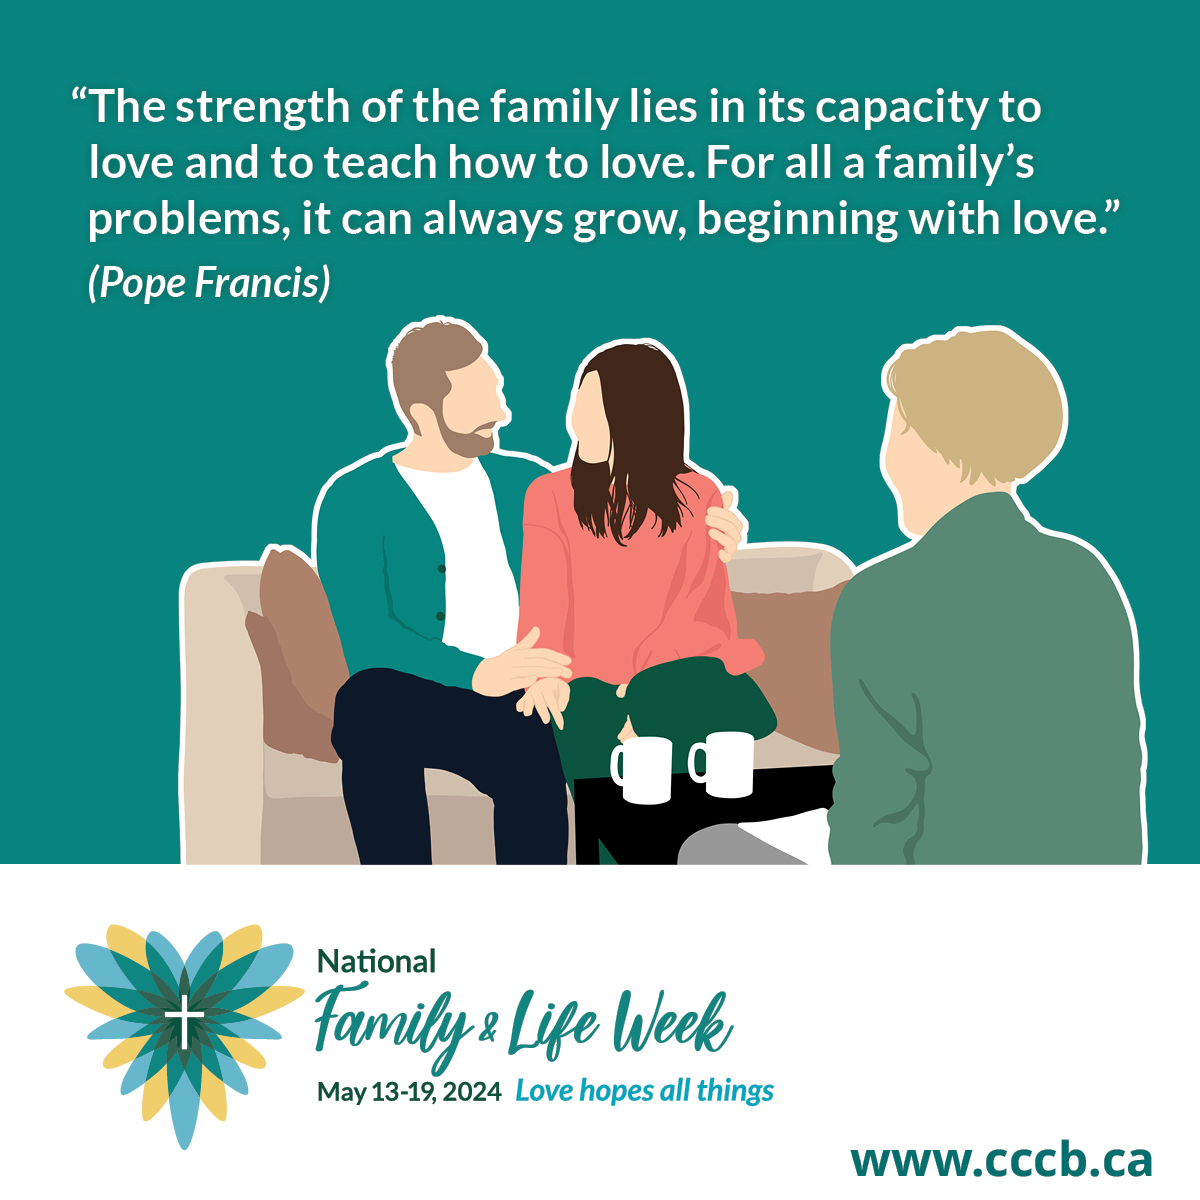 On this third day of National Family and Life Week, we pray that families may find peace and hope during times of crisis: God, our Father, we entrust our family relationships to you - teach us to welcome each other with our differences, and to forgive one another. #NFLW2024